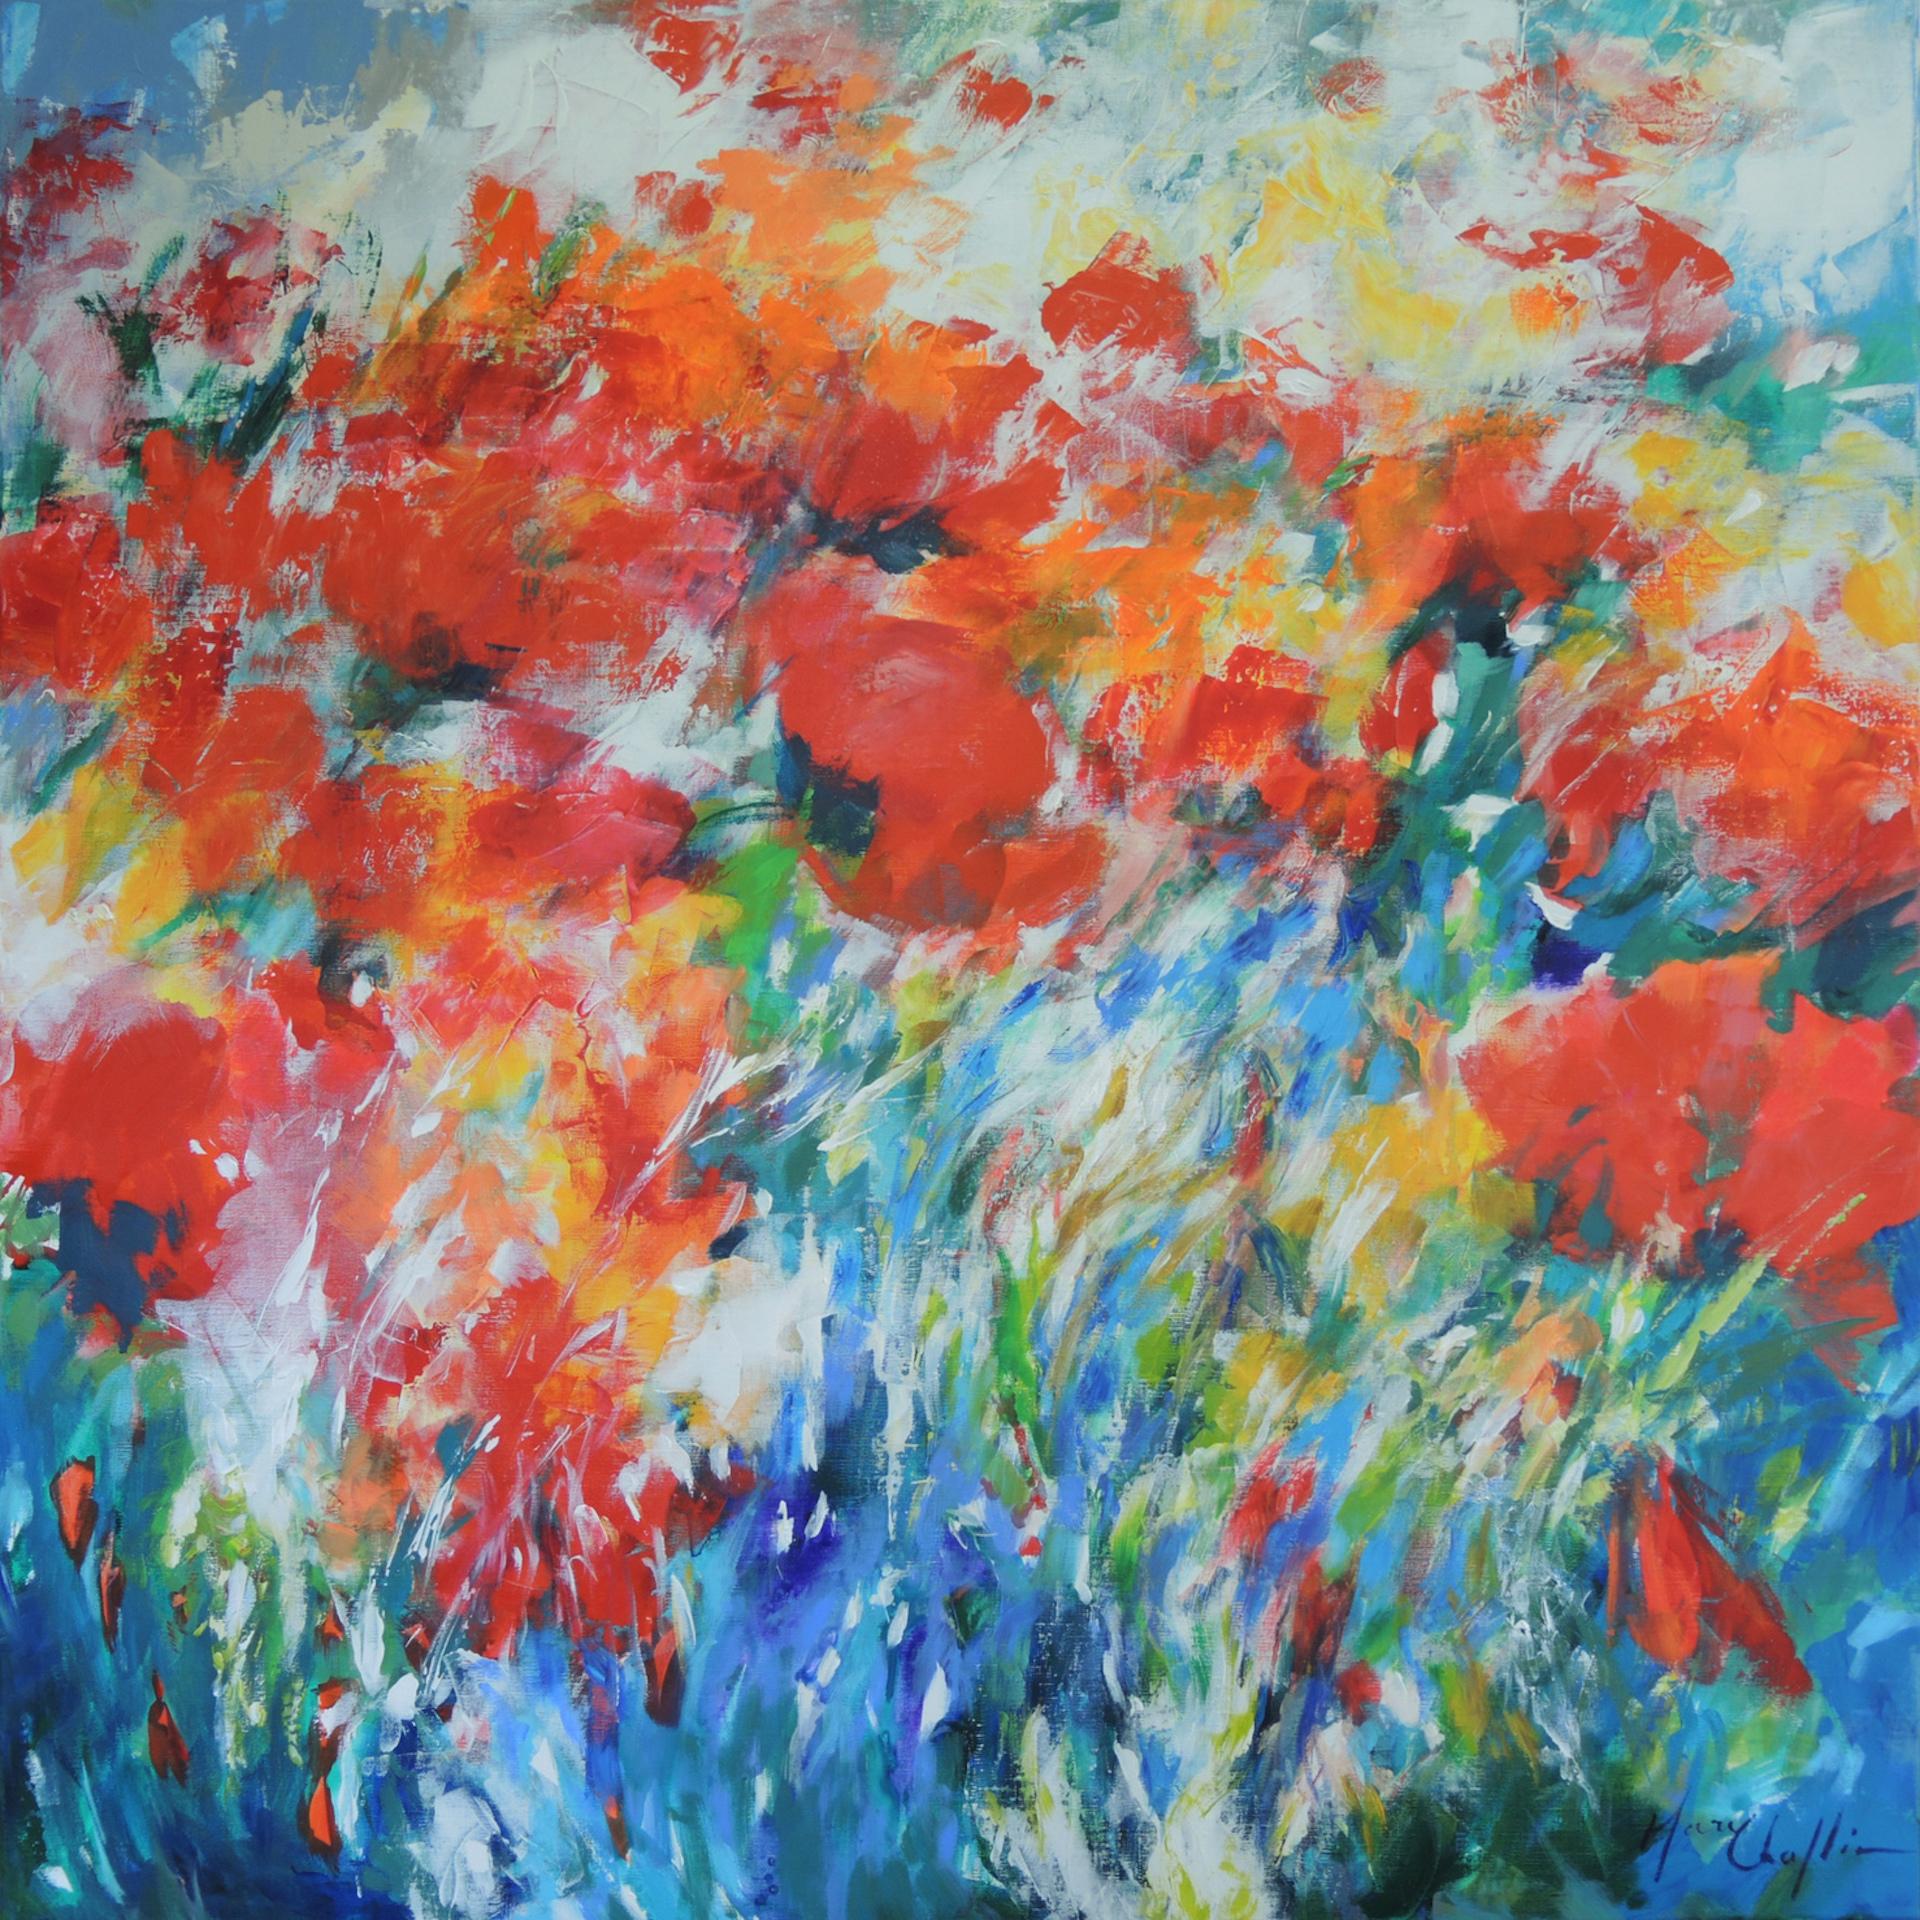 Oriental Poppies in the Summer Wind, Mary Chaplin, Contemporary ImpressionistArt